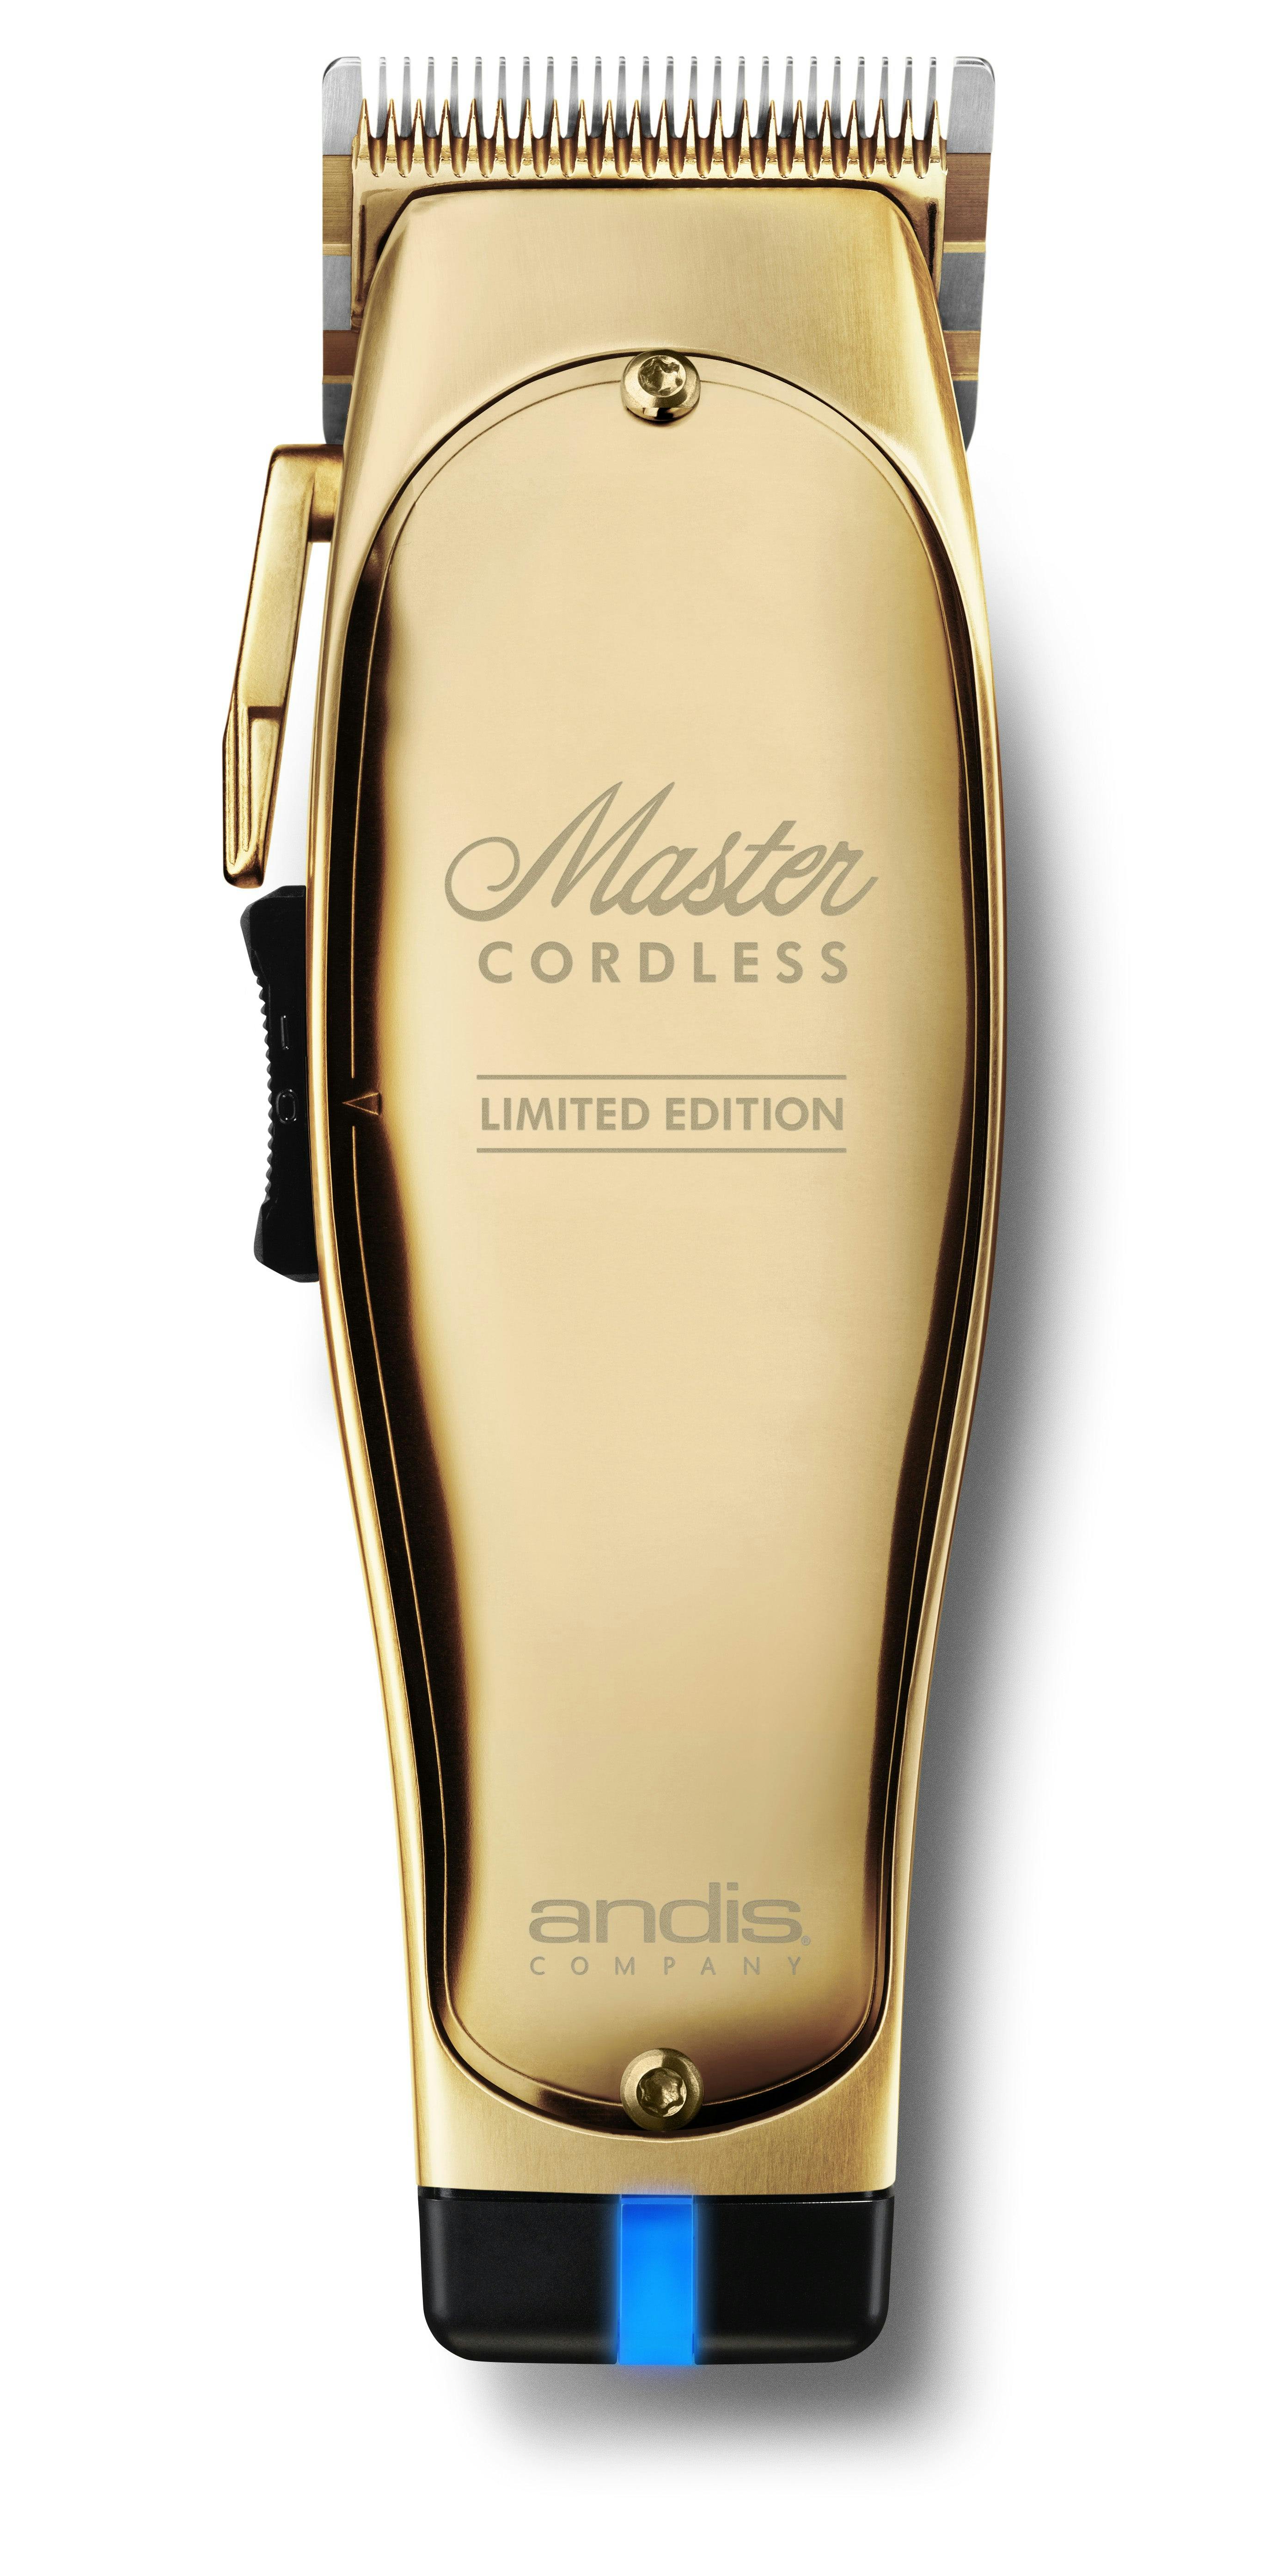 Andis Gold Master Clipper